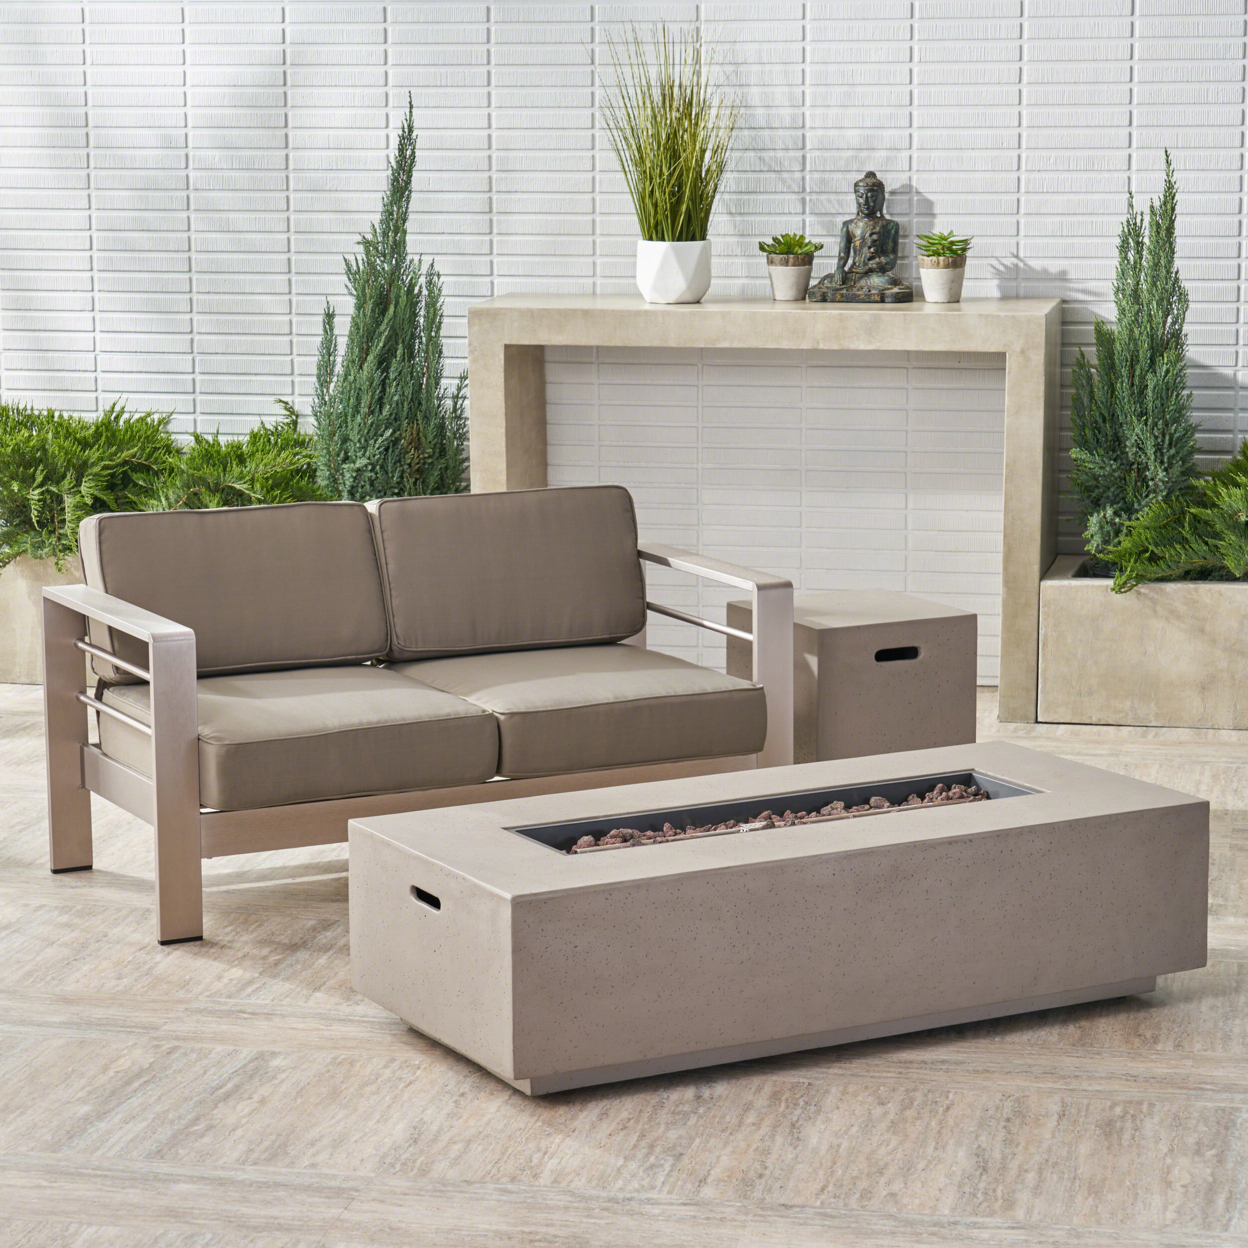 Danae Coral Outdoor Loveseat And Fire Pit Set - Dark Grey